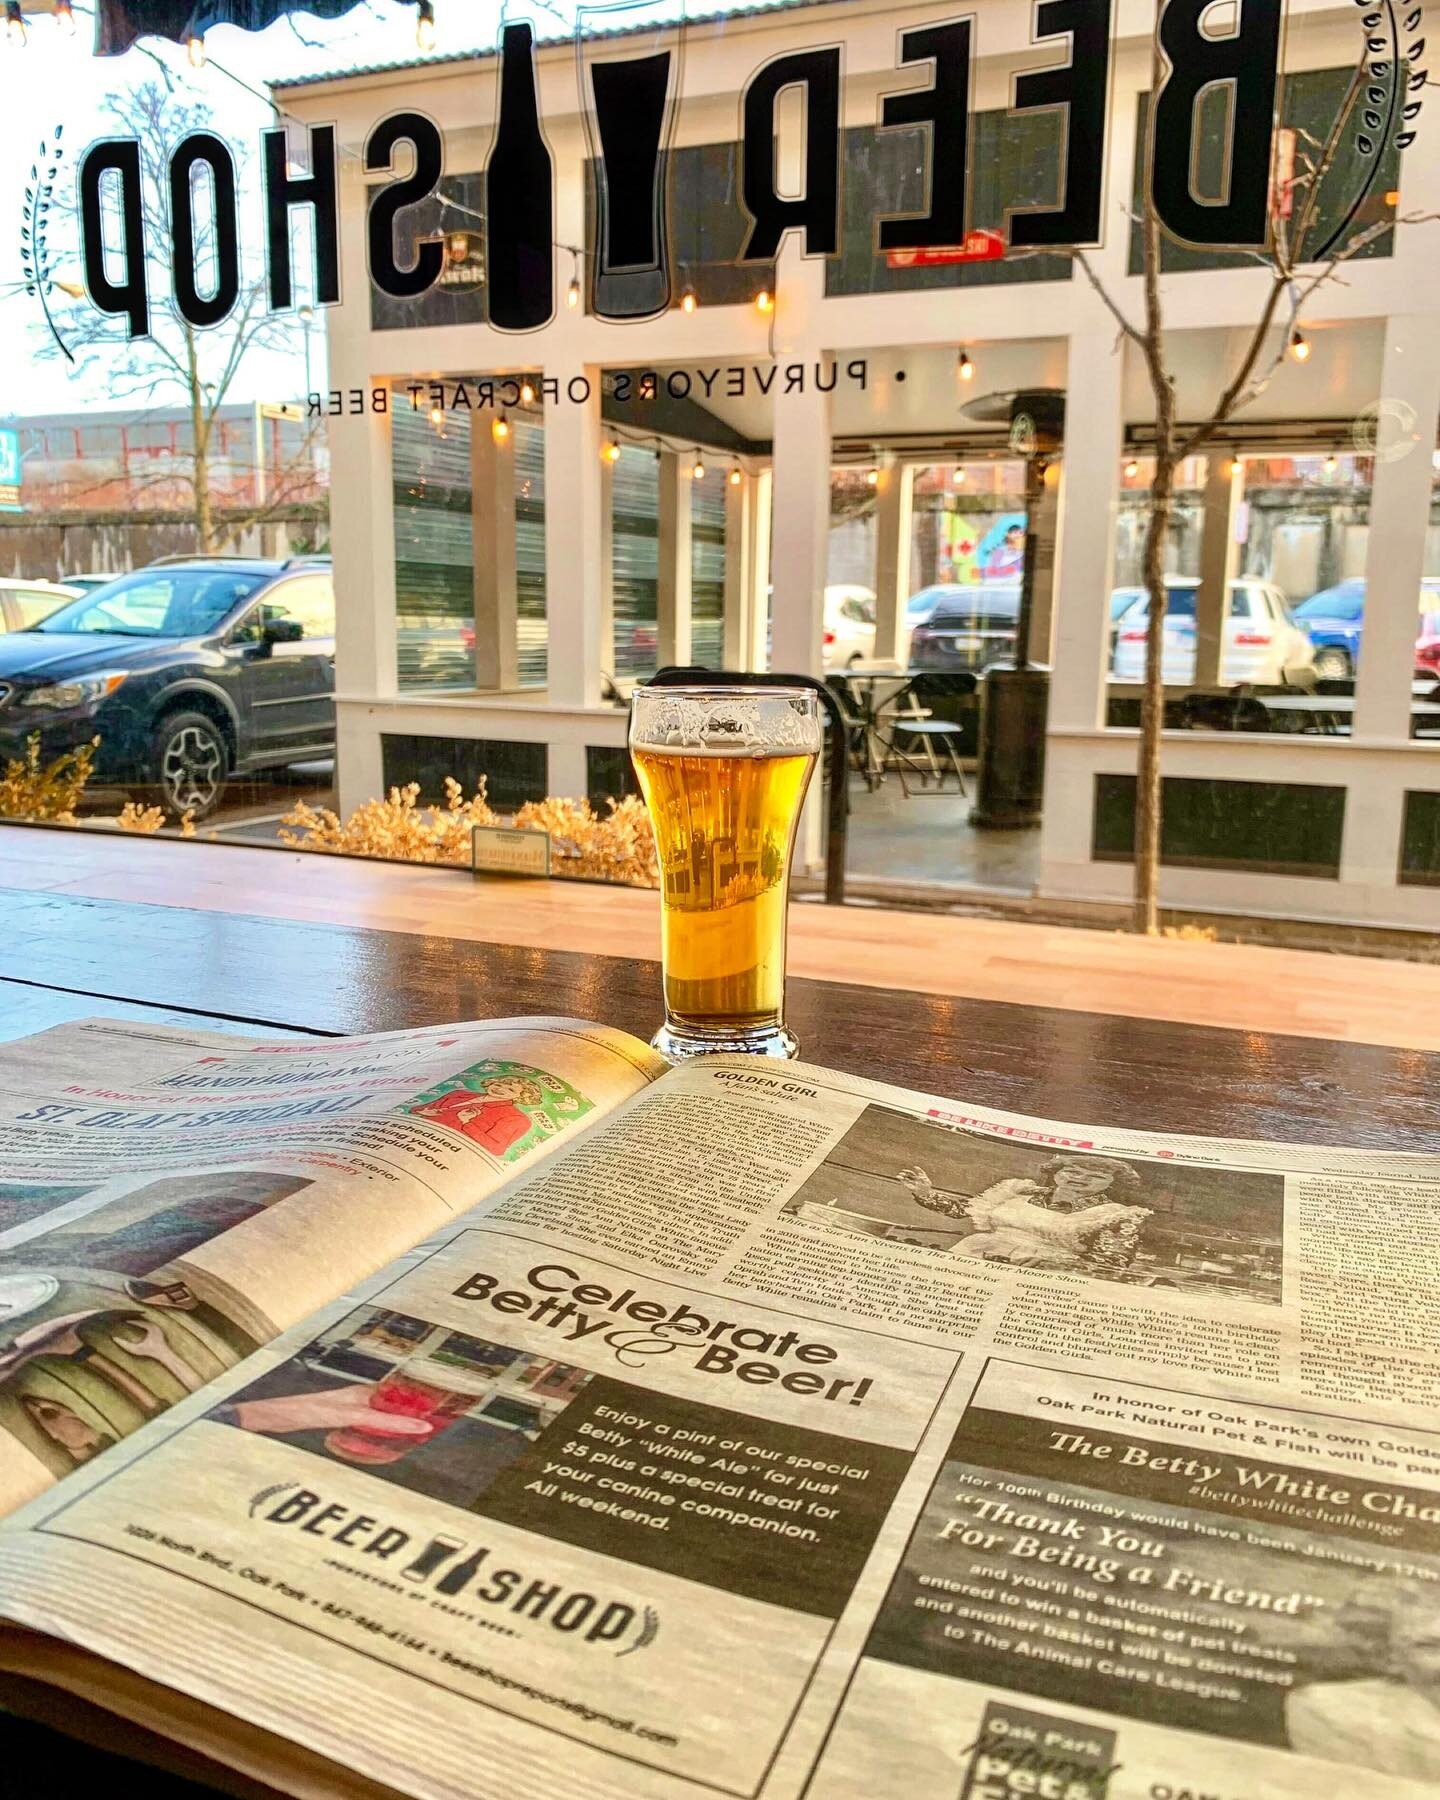 Did you catch us in the &ldquo;Be Like Betty&rdquo; edition of the @wednesdayjournal? 🤩

#belikebetty 
#beershophq
#wednesdayjournal 
#bettywhite 
#thankyouforbeingafriend 
#goldengirl 
#oakparkillinois
#oakparkil
#sunshinetherapy 
#centennialcelebr